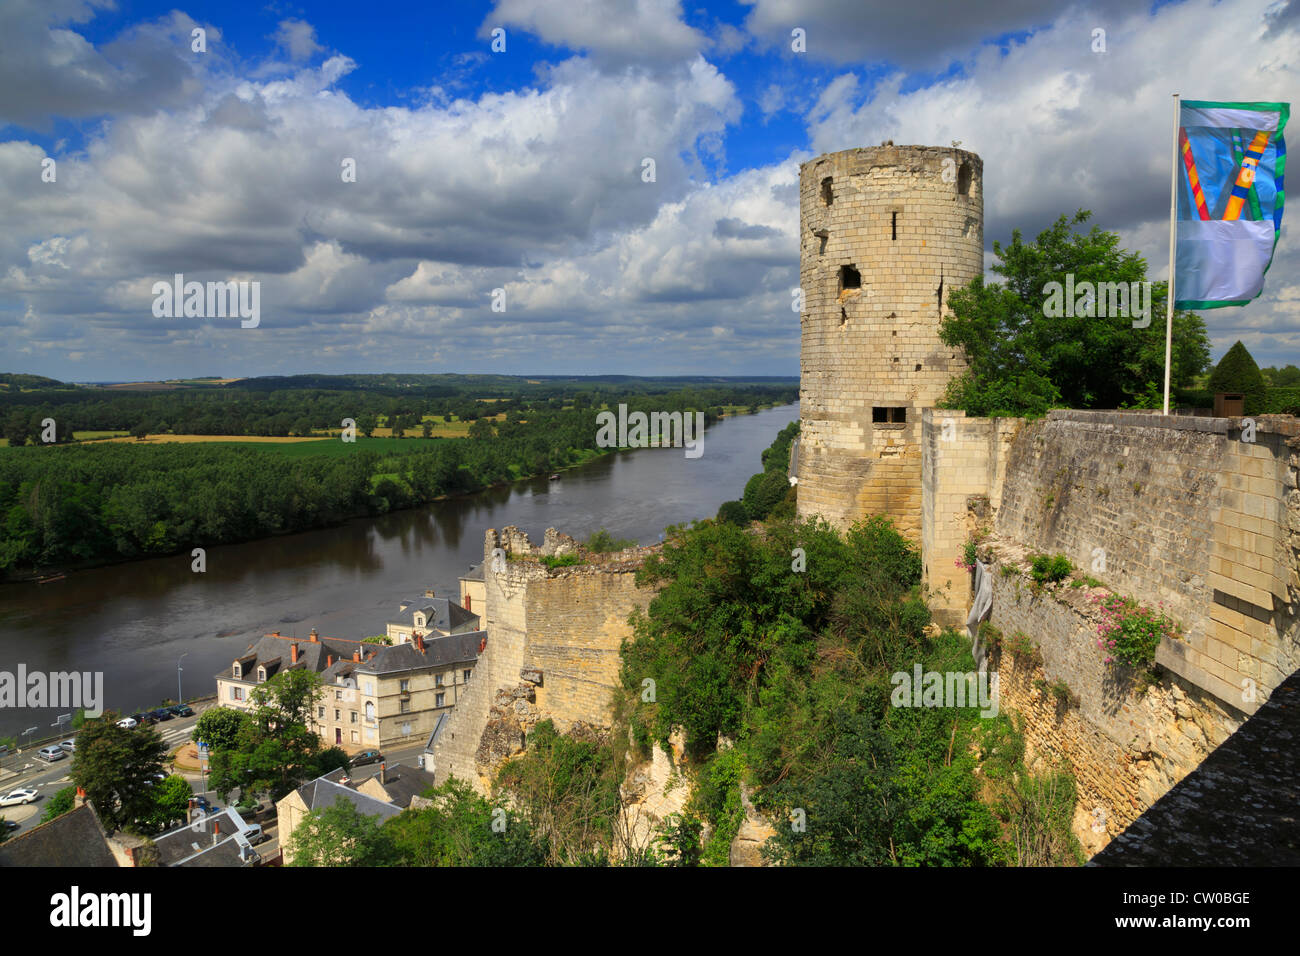 Tour du Moulin and the Loire River, Chinon, France. The tower is the corner keep of the Fort du Coudray. Stock Photo